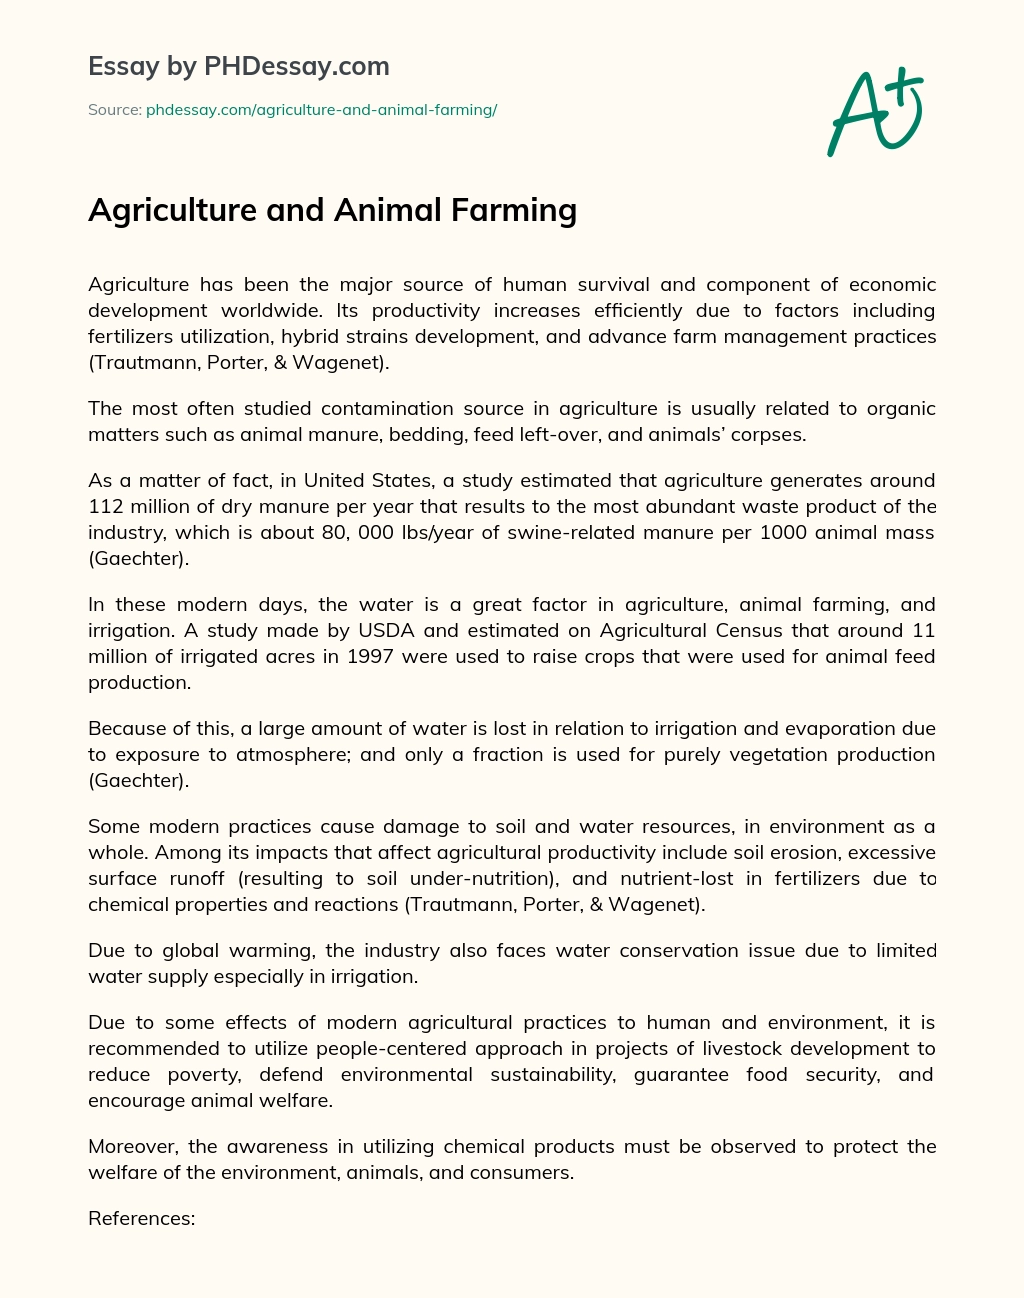 Agriculture and Animal Farming essay